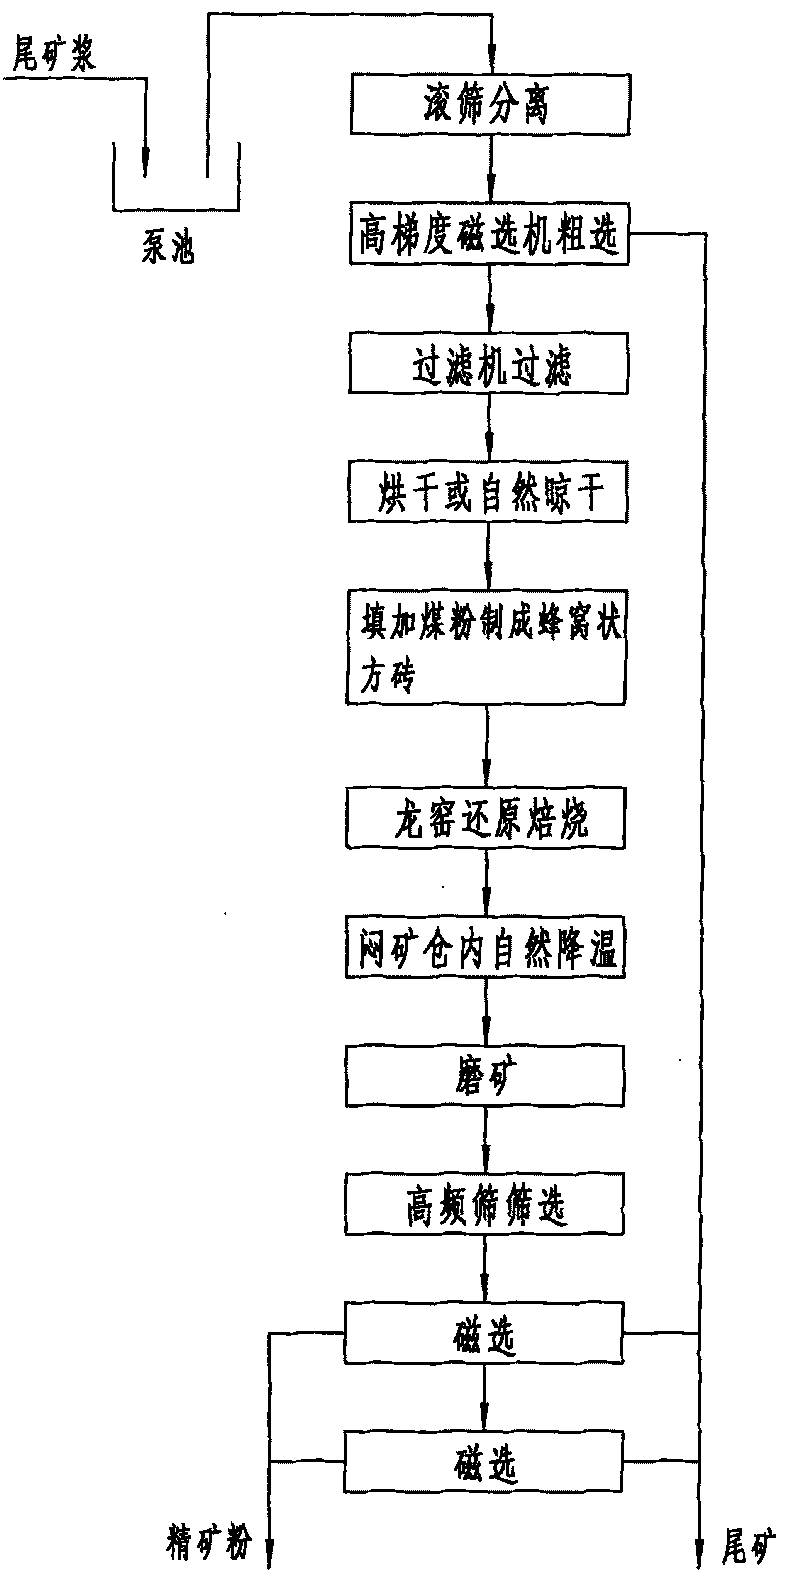 Process for roasting and restoring tailings with weak-intensity magnetism by dragon kiln